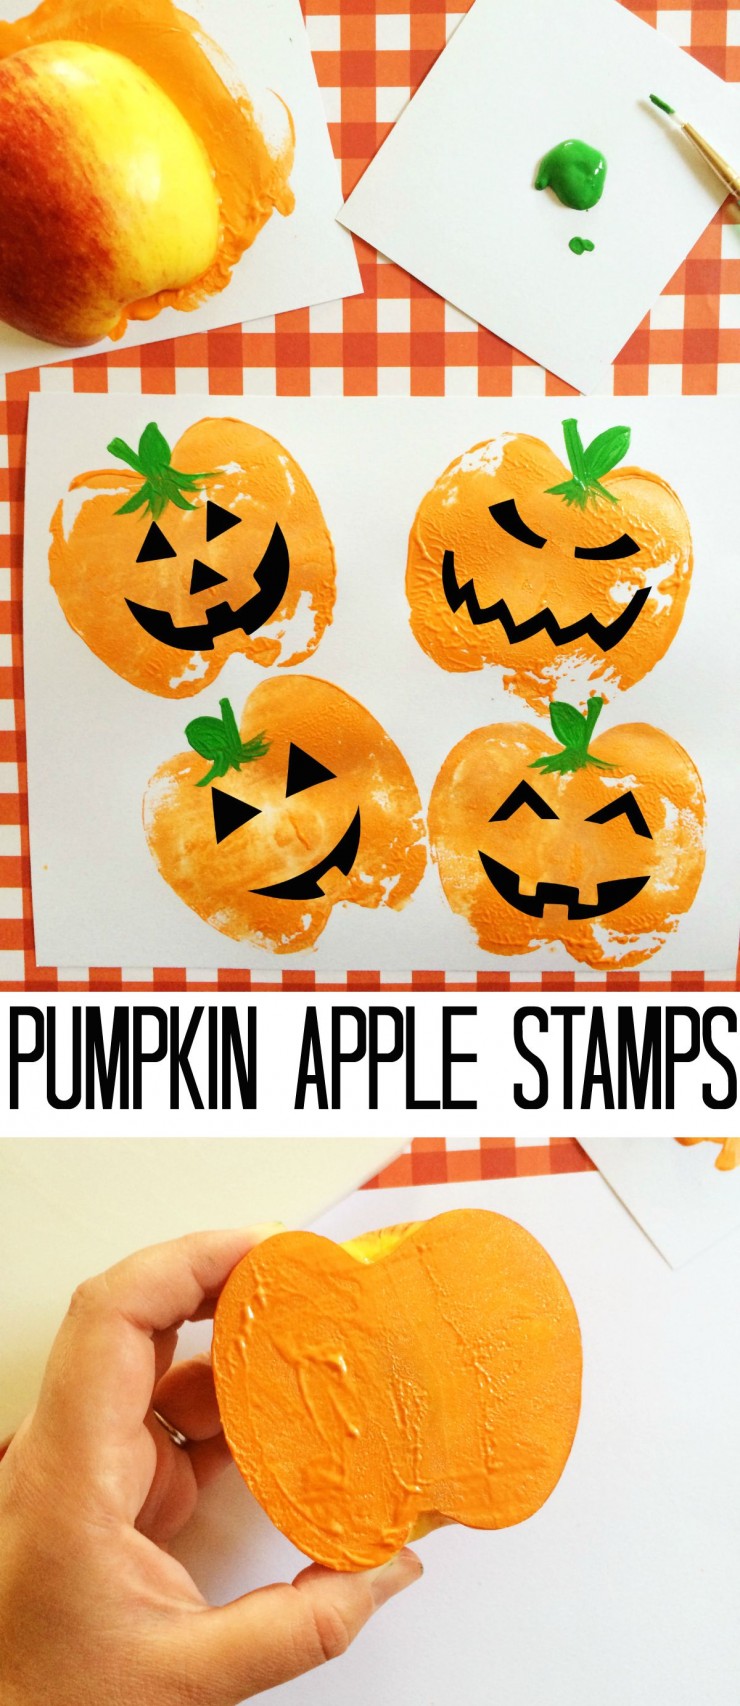 These Pumpkin Apple Stamps are a fun way to celebrate the coming autumn season! This is a kids craft that will keep children busy creating works of art!